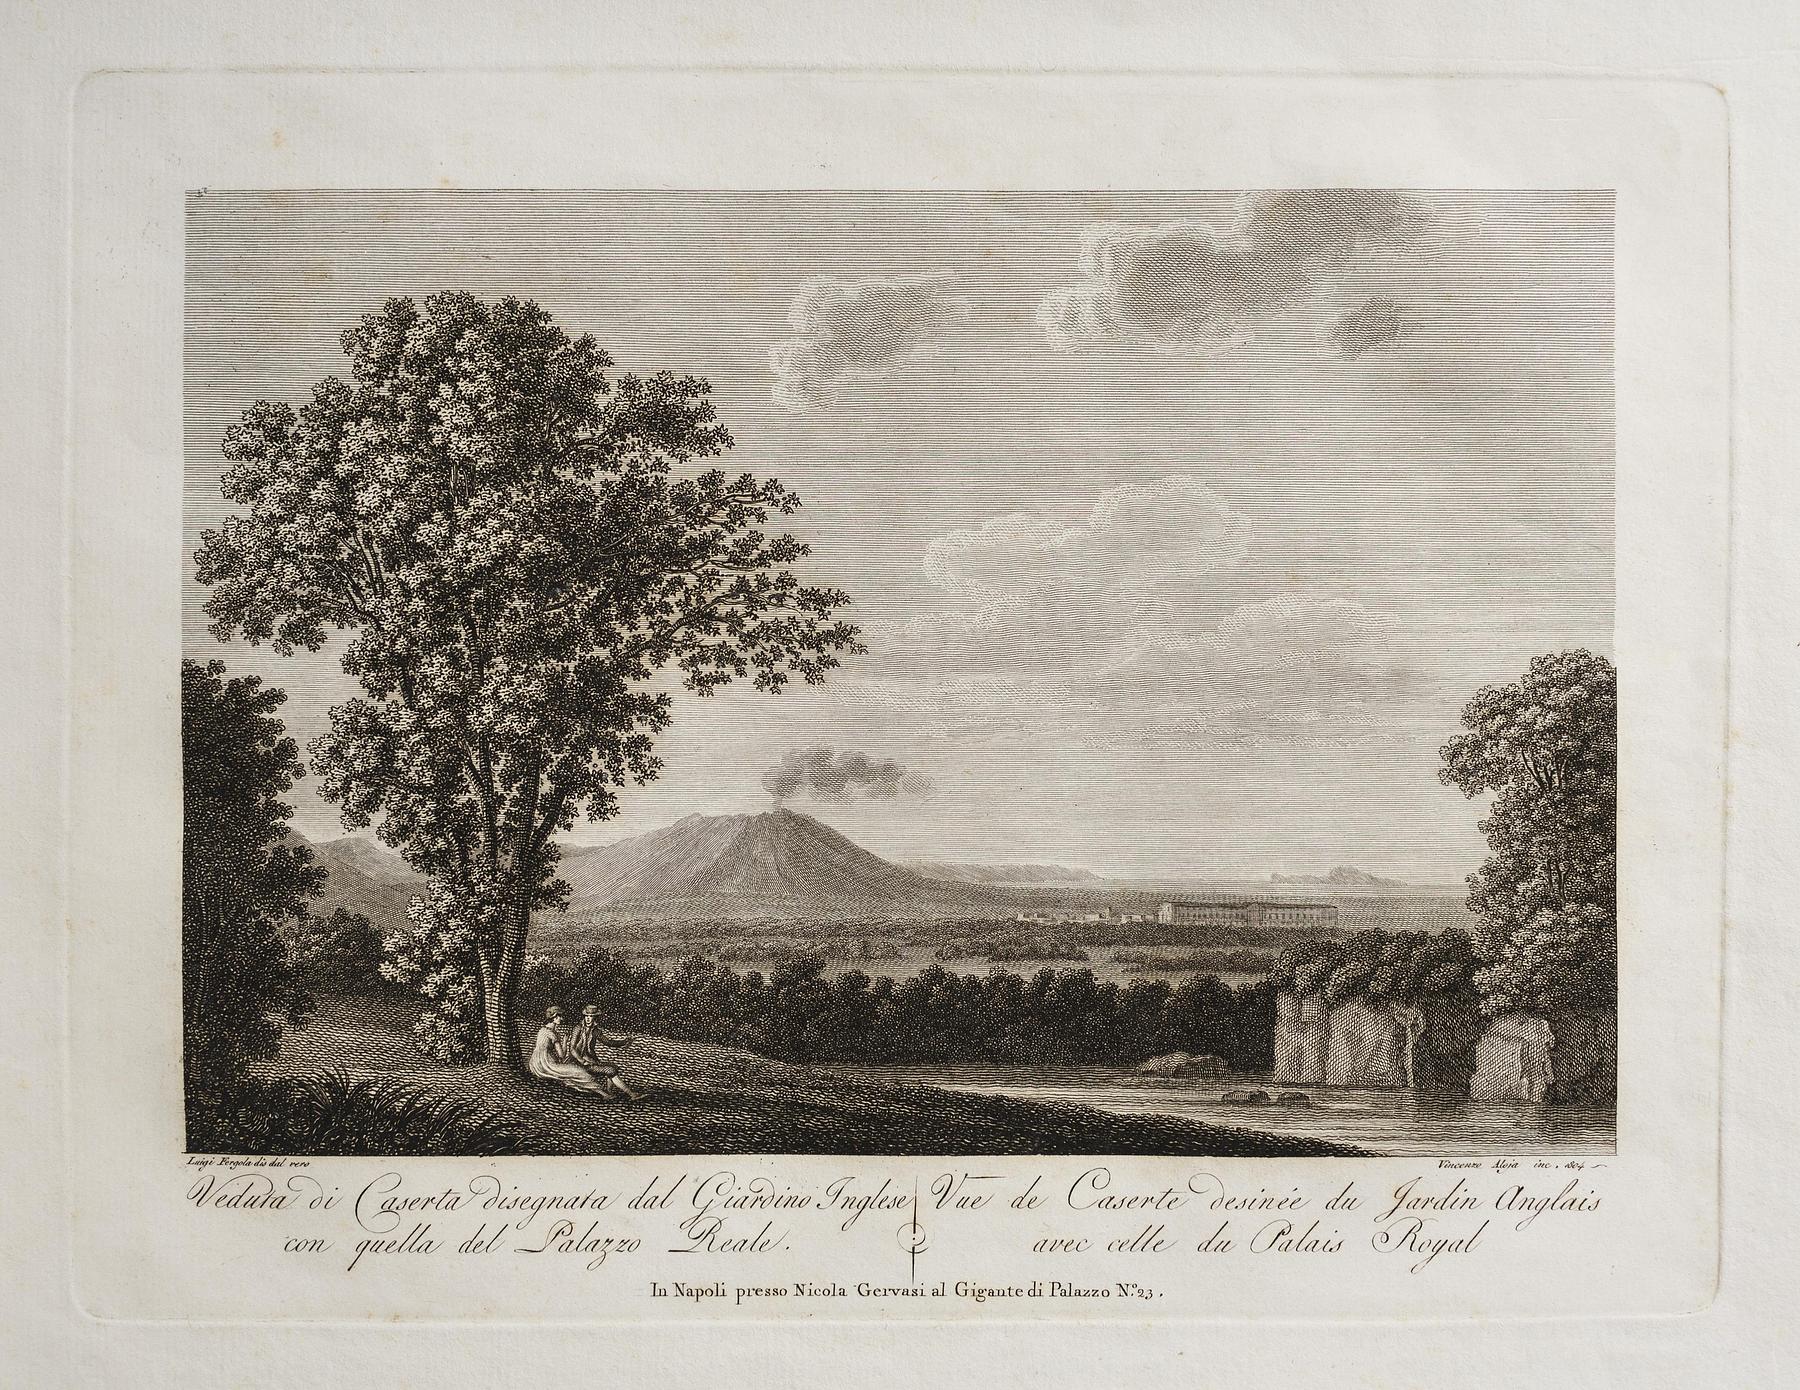 View of Caserta drawn from the English Garden with the Royal Palace, E333,4